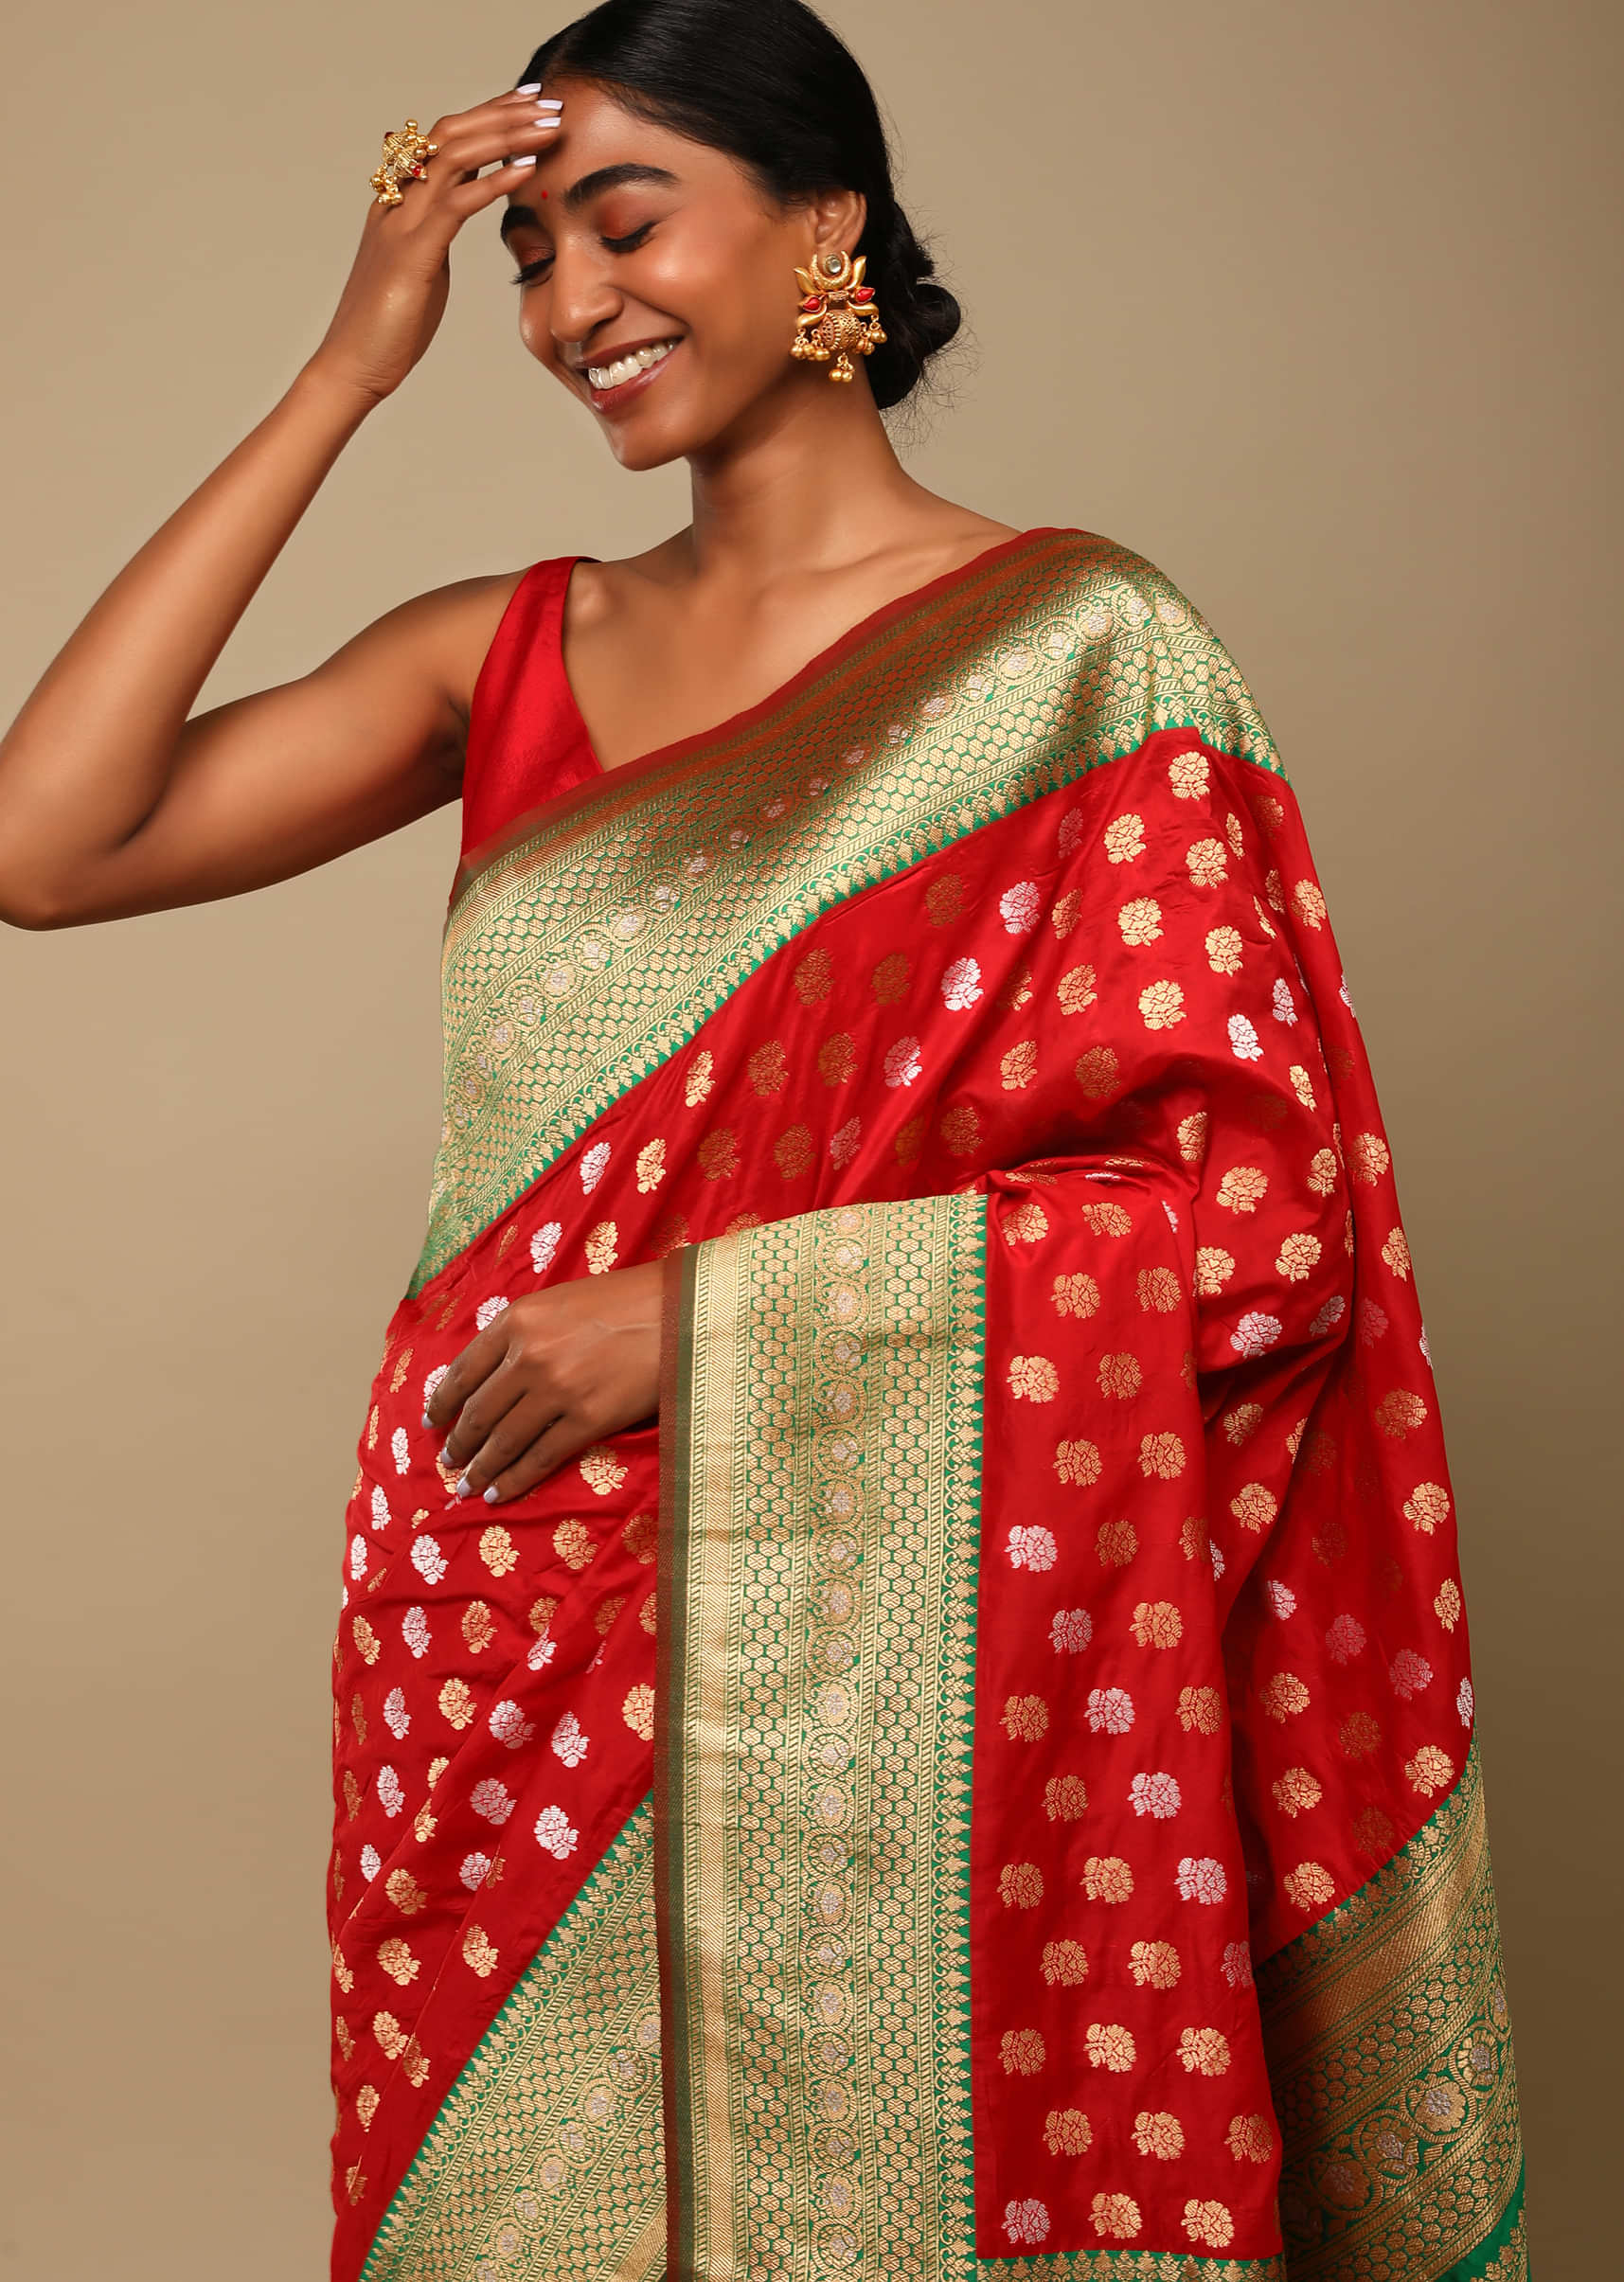 Vermillion Red Saree In Art Handloom Silk With Green Woven Border And Two Toned Buttis Along With Unstitched Blouse  